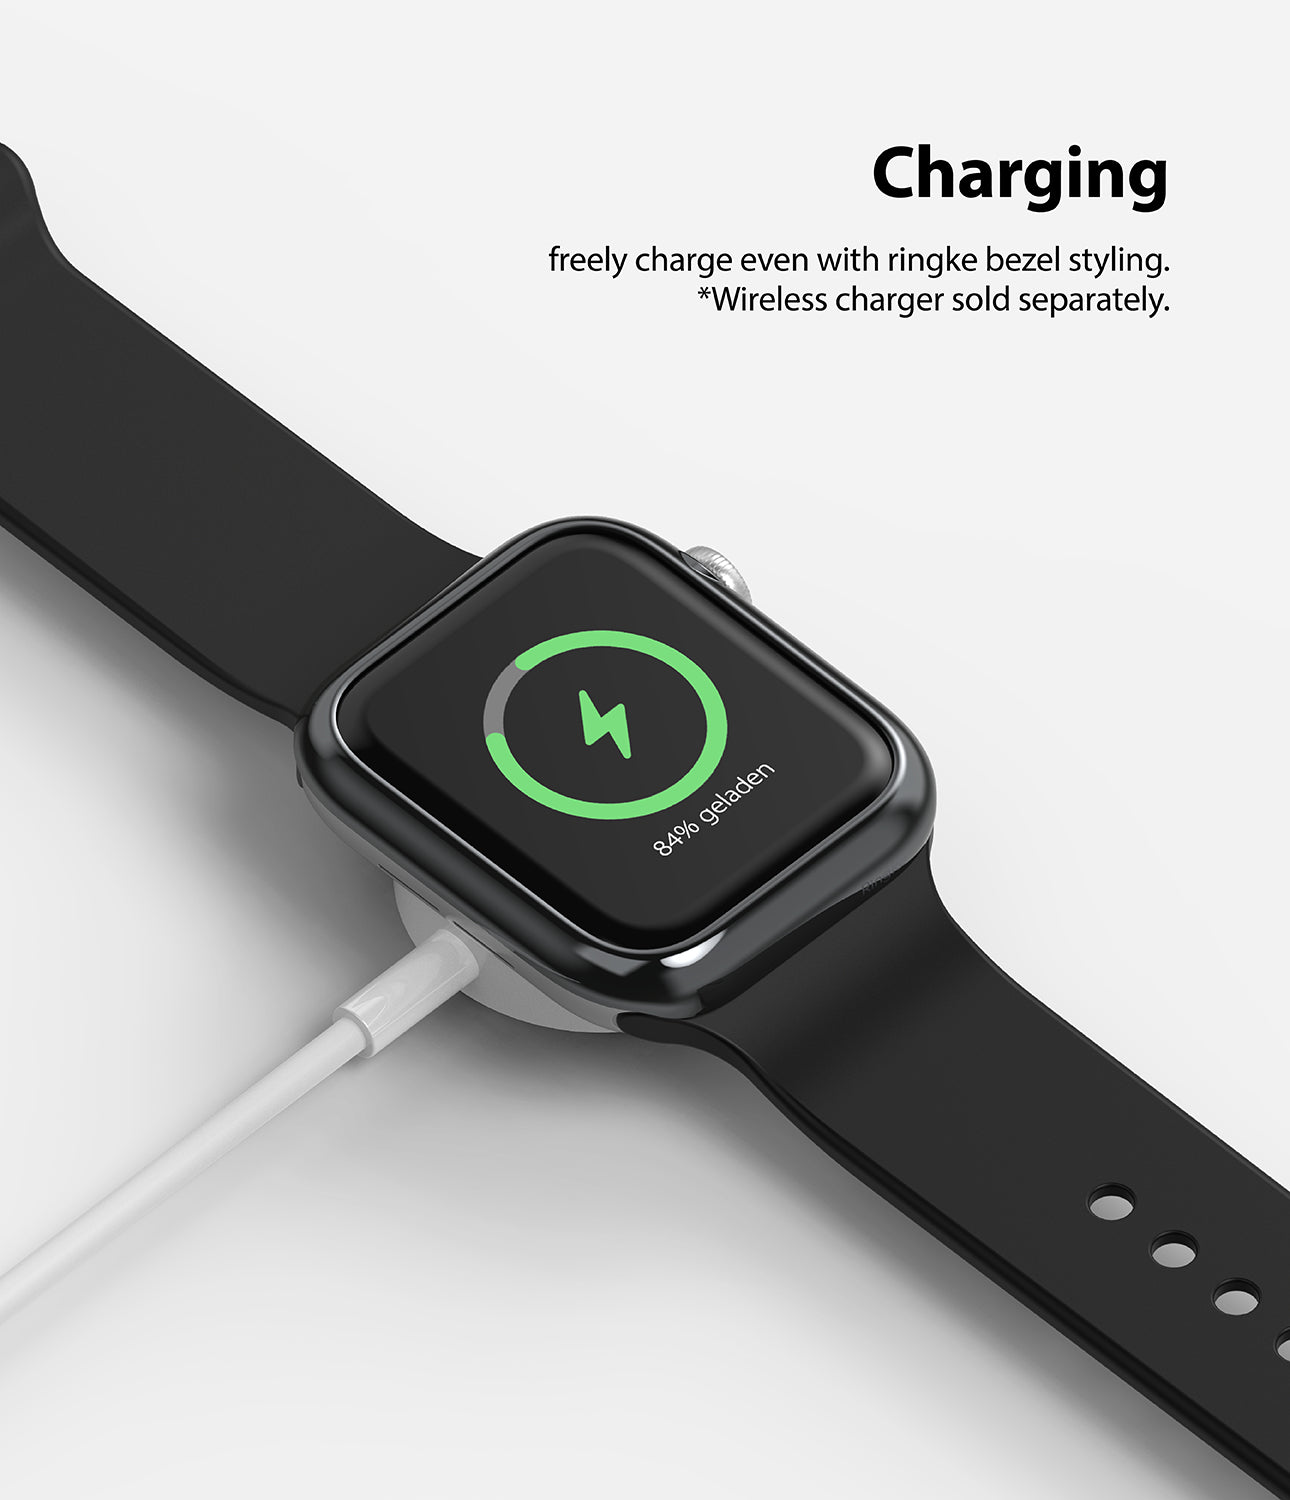 wireless charging compatible without removing the bezel styling